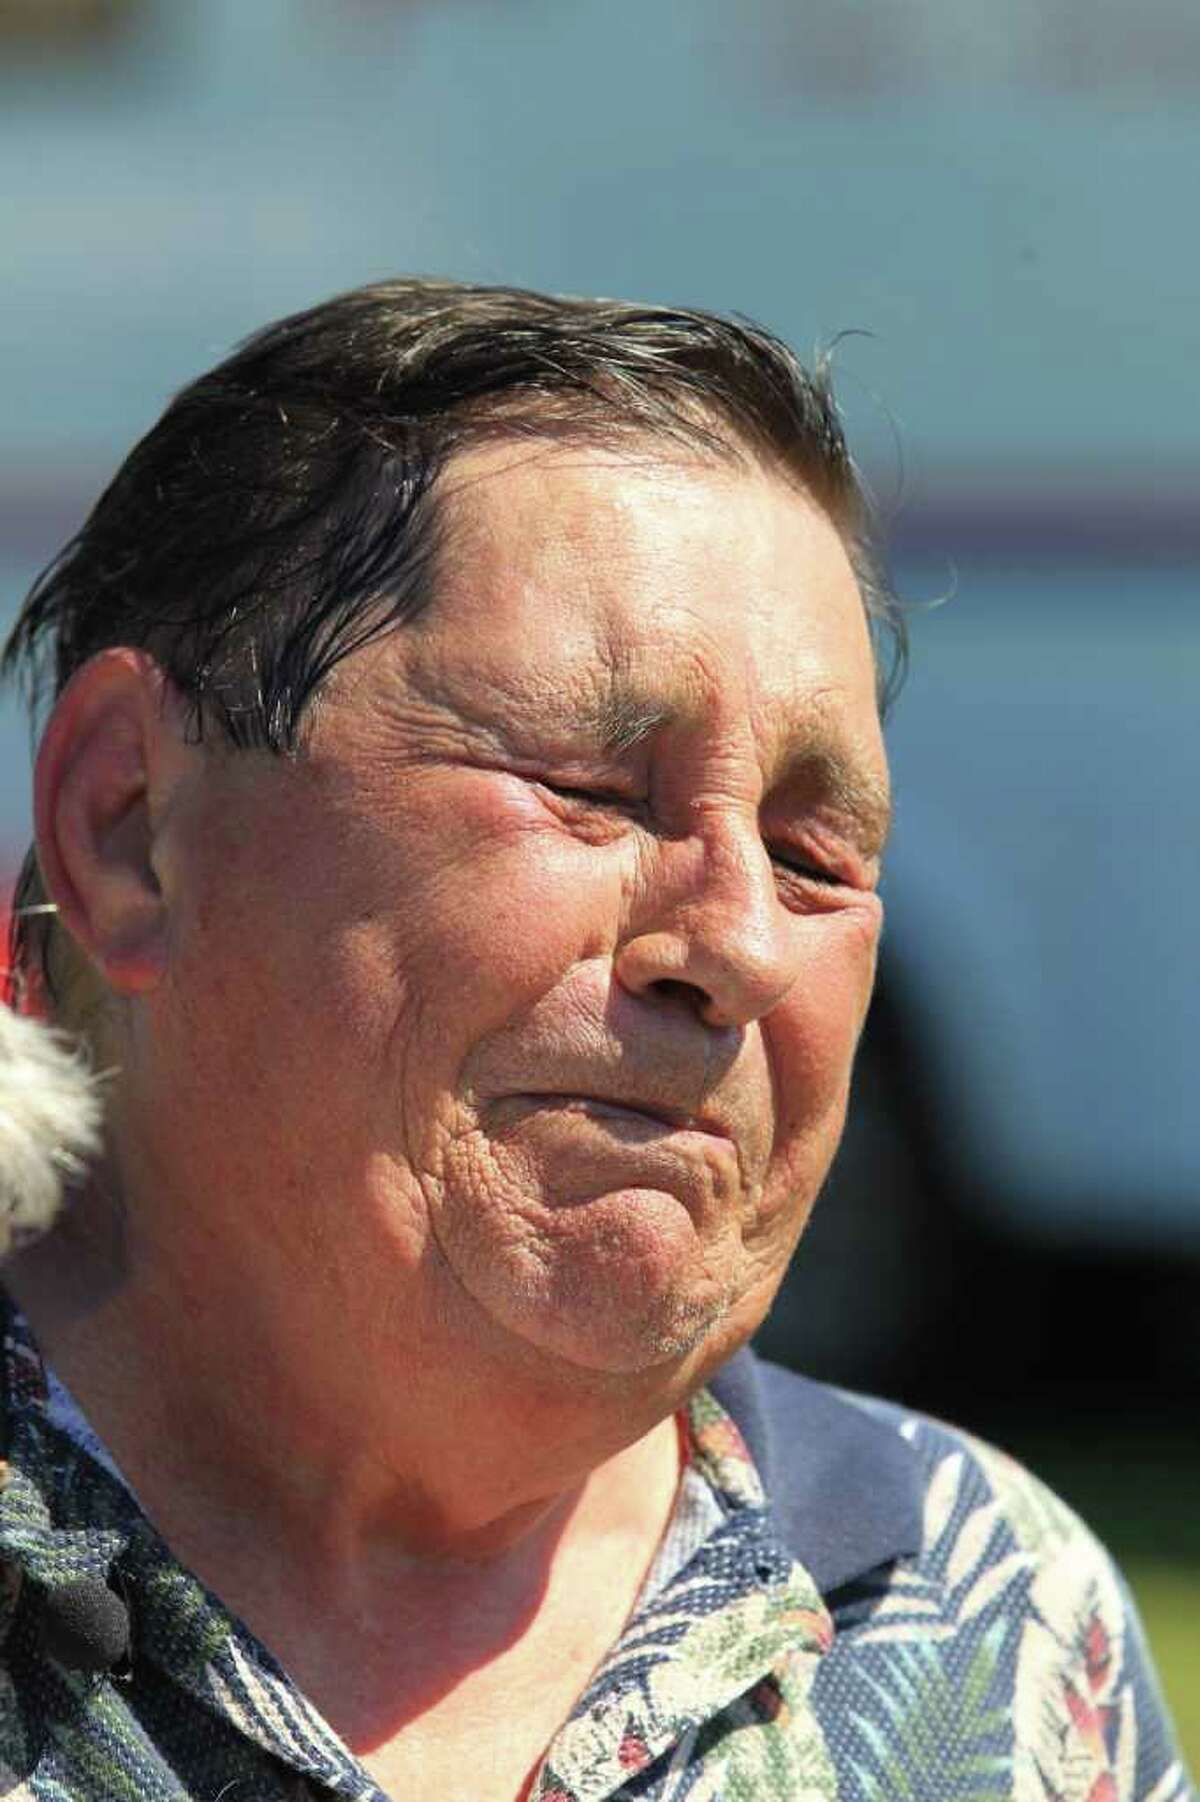 Ken Hutchins cries as he talks about the death of 4-year-old Kylar Johnson, who was found dead near his home Monday morning, March 26, 2012, apparently mauled to death, near Victoria, Texas. Over 100 volunteers converged on the rural area searching for the boy who went missing about 8 p.m. Sunday. A neighbor found the boy about 10:30 a.m.